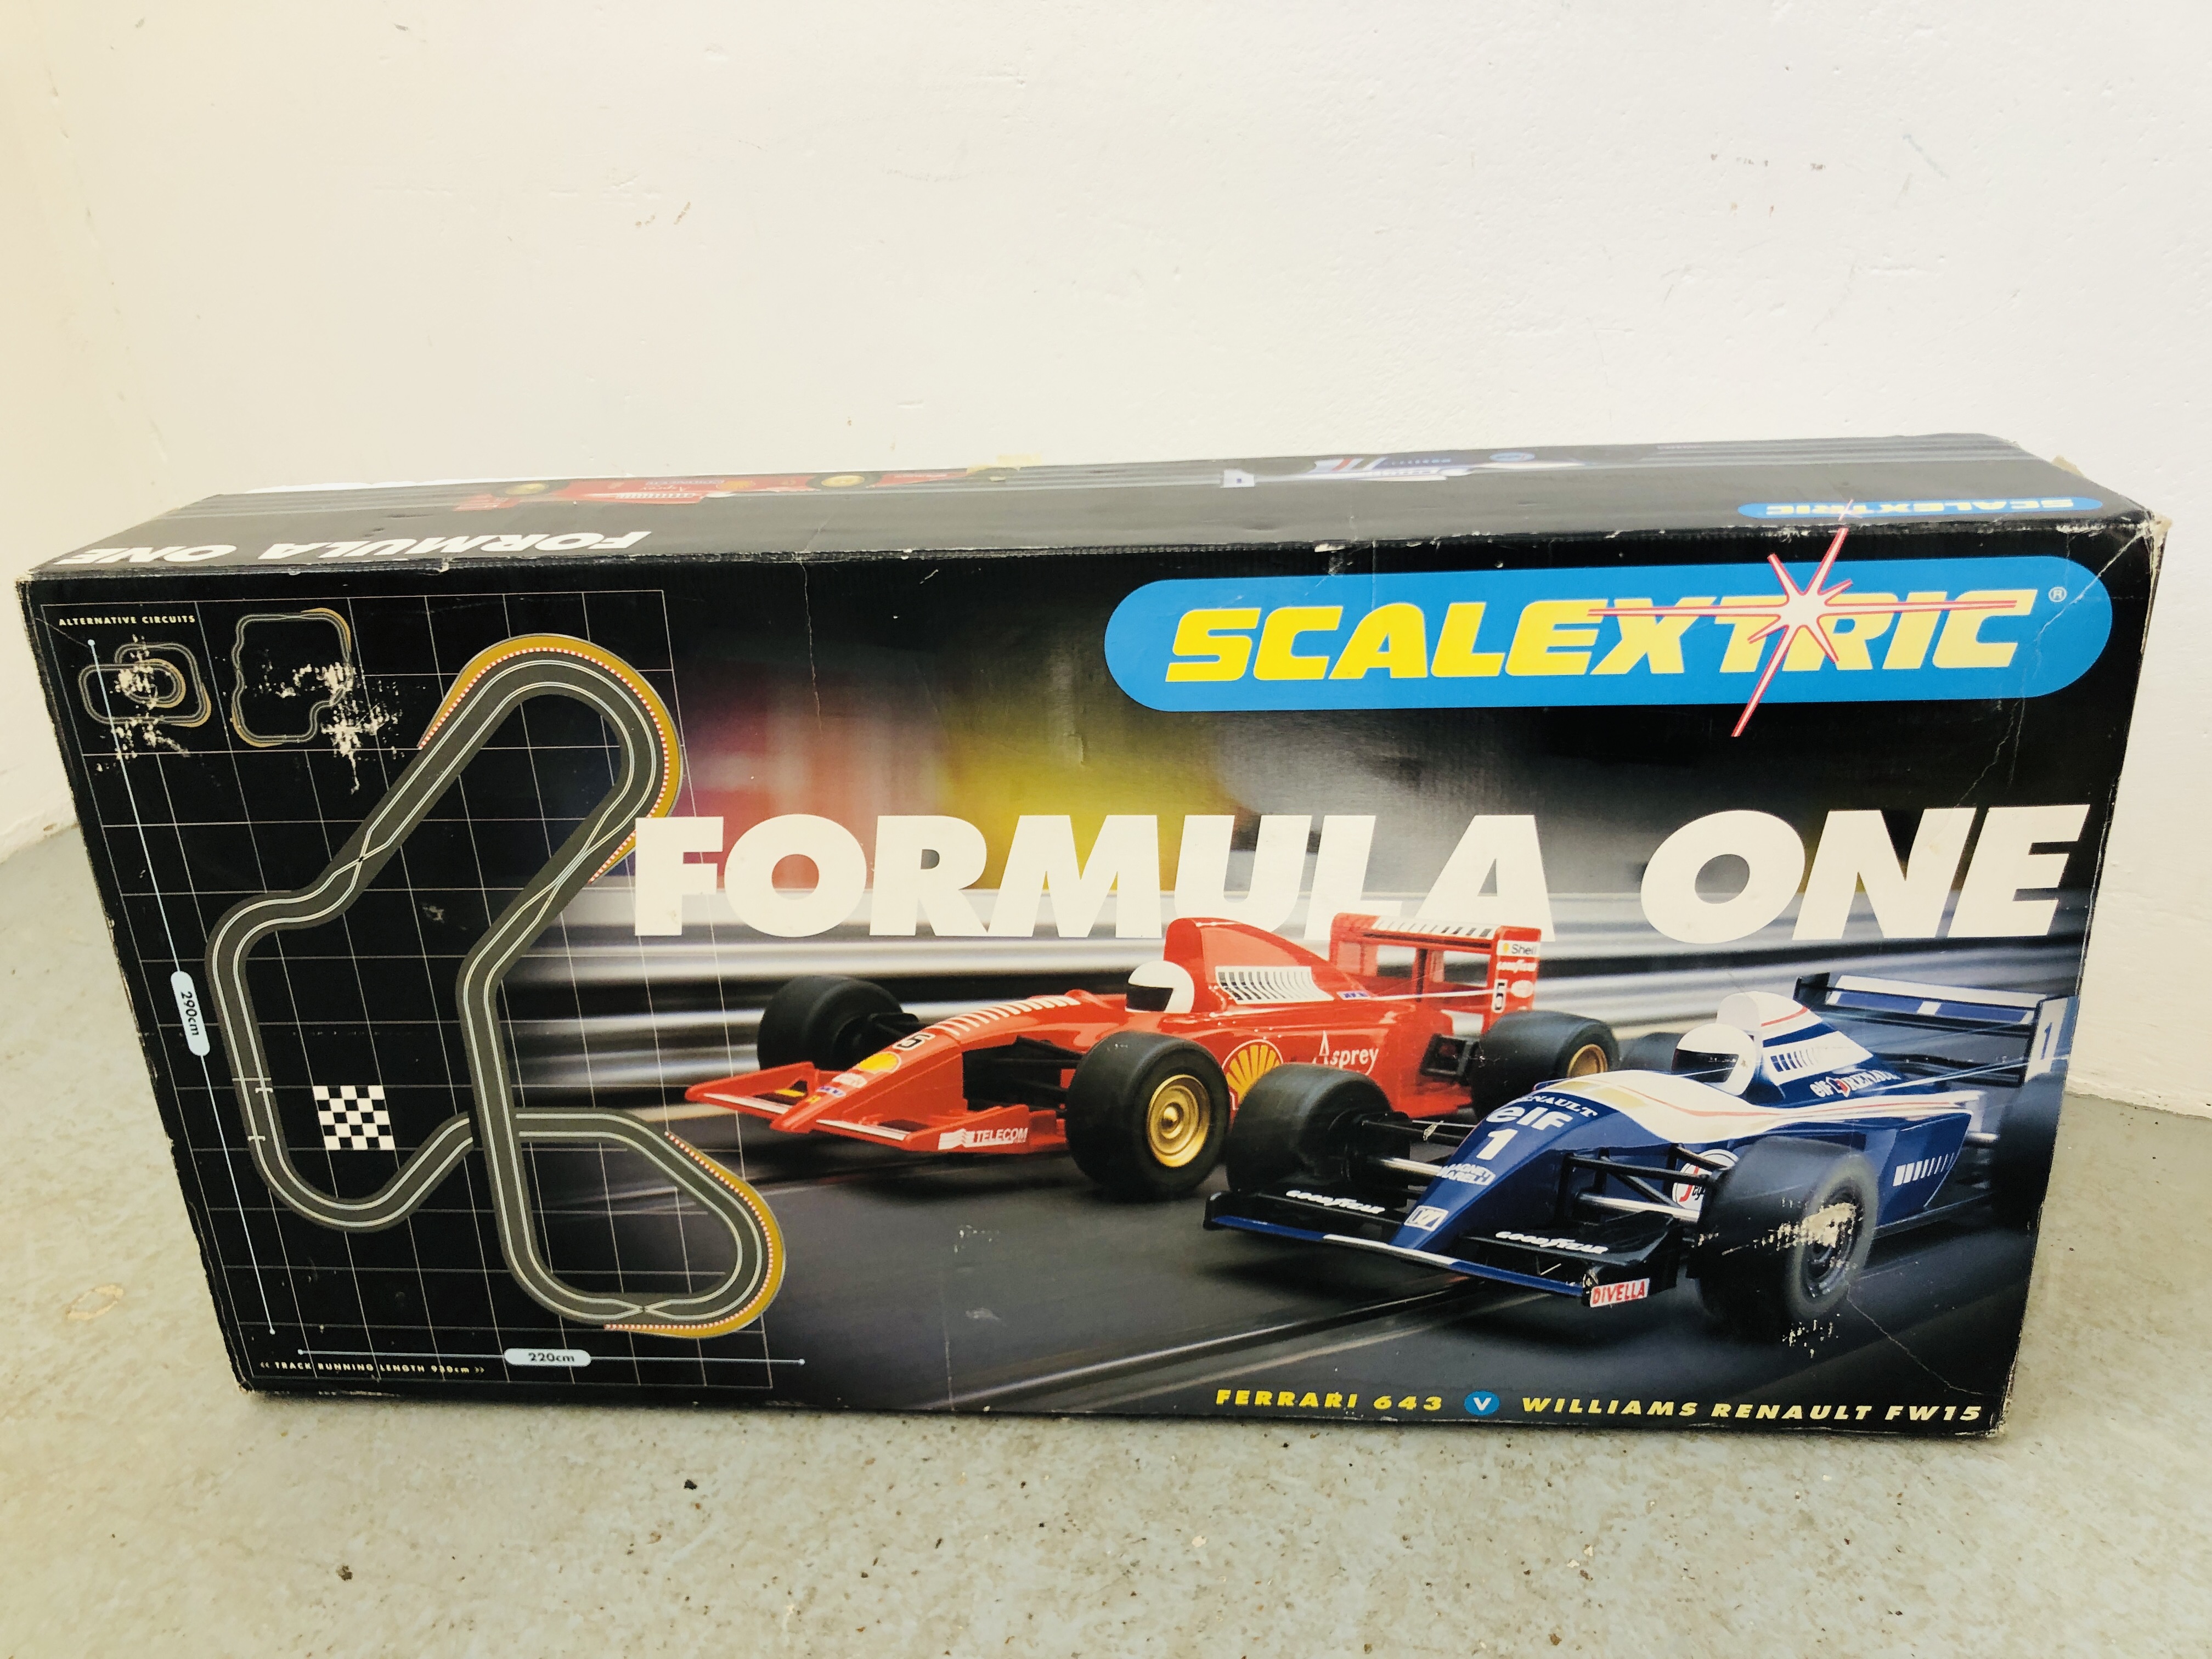 SCALEXTRIC "CHAMPION TOURERS" RACING GAME AND SCALEXTRIC "FORMULA ONE" RACING GAME - Image 5 of 8